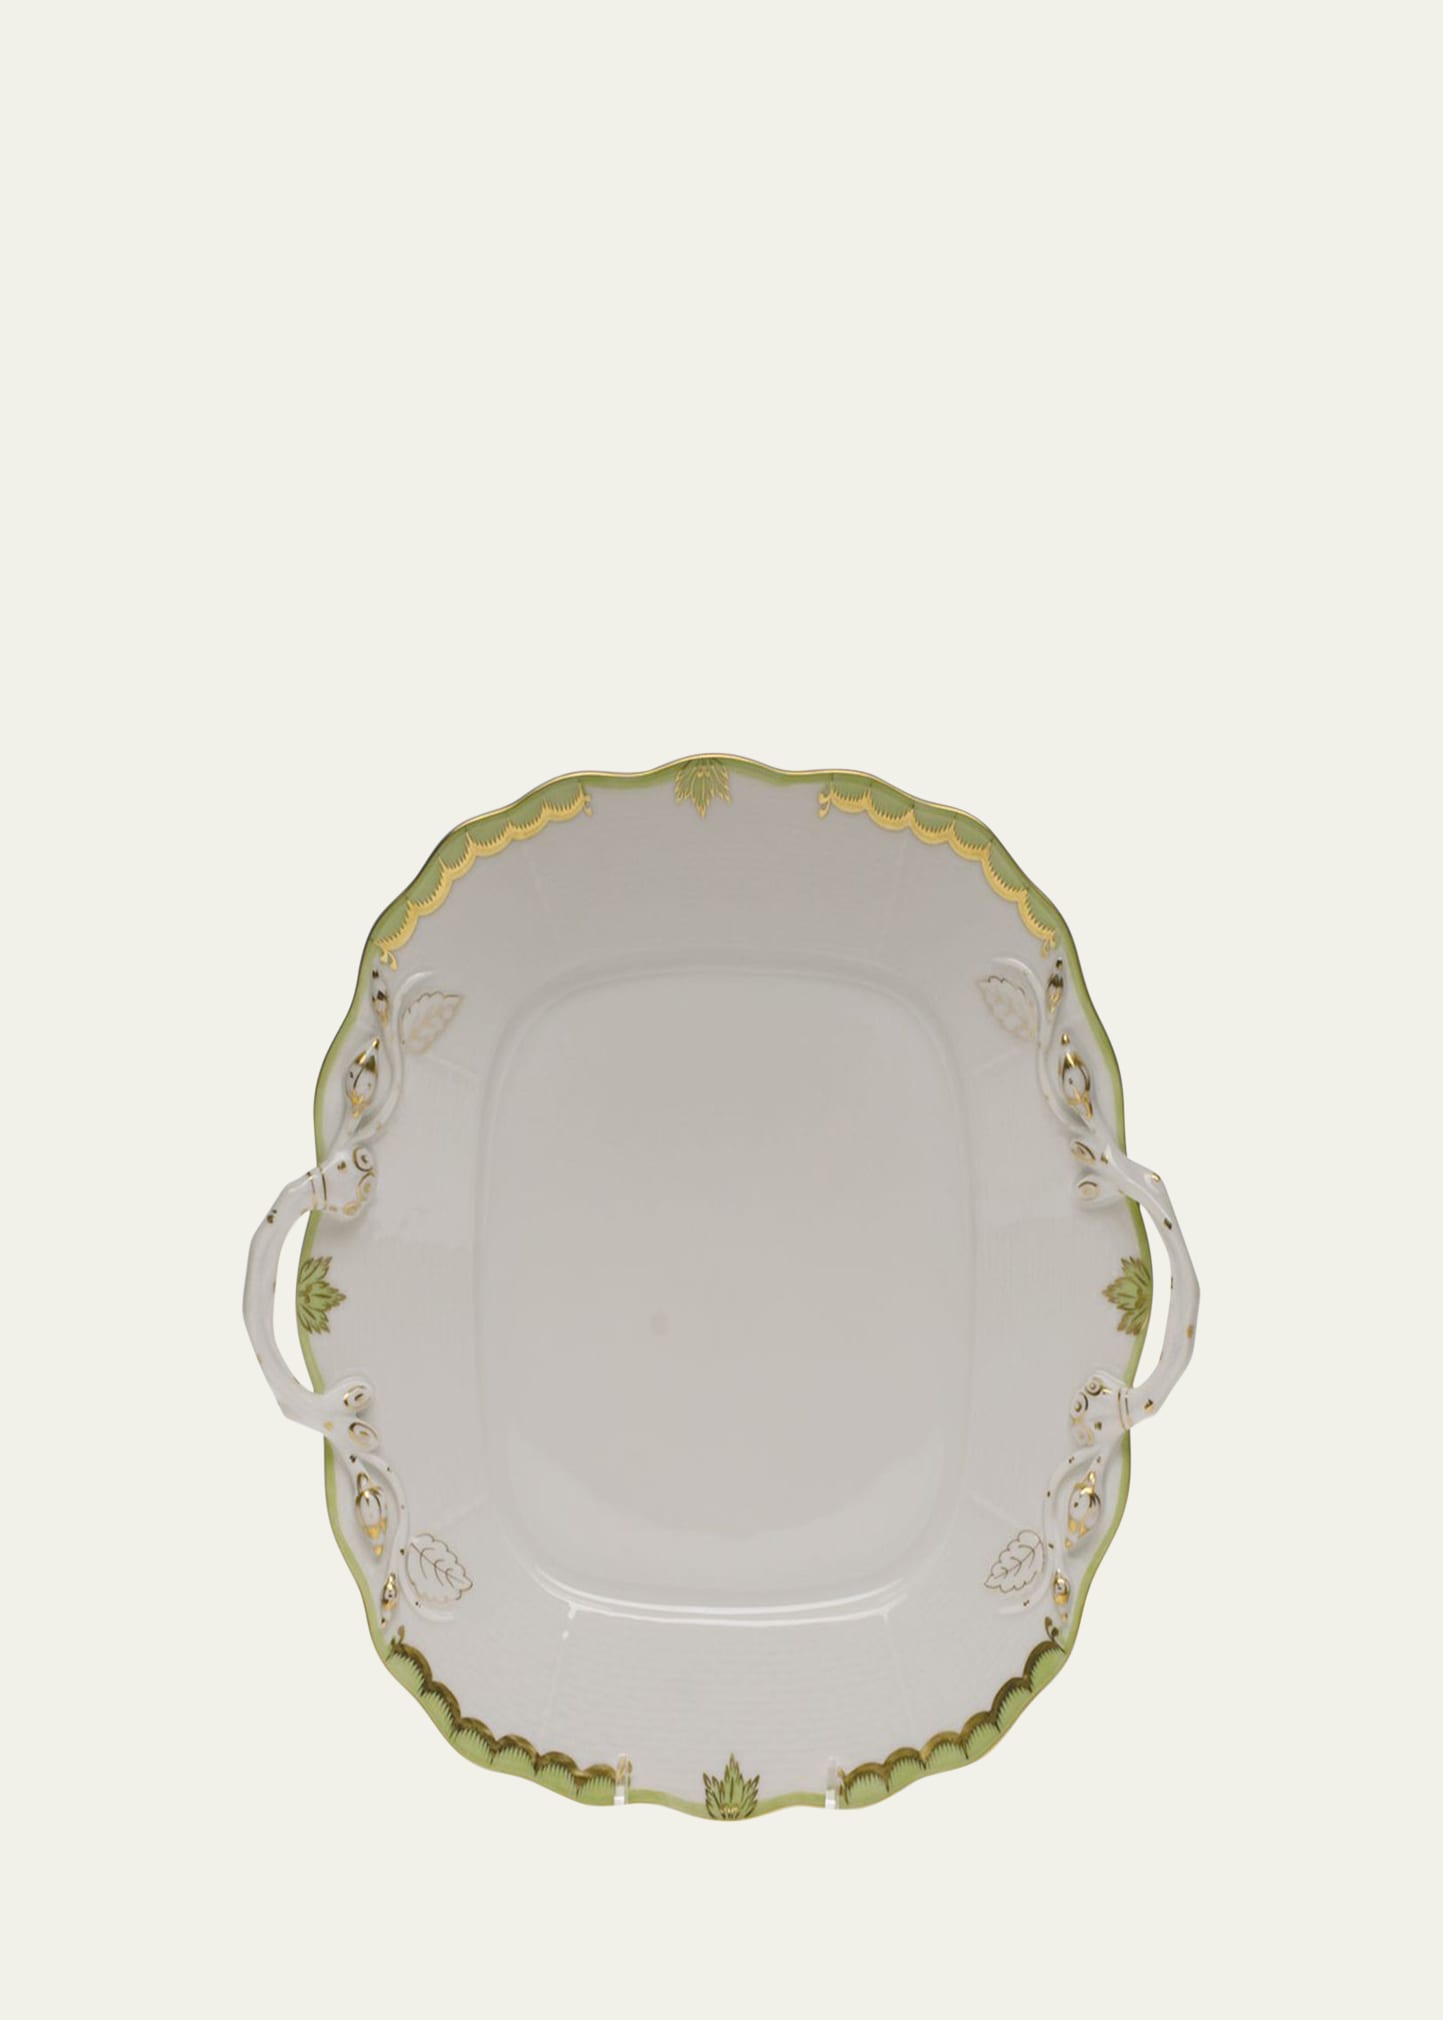 Princess Victoria Green Square Cake Plate with Handles